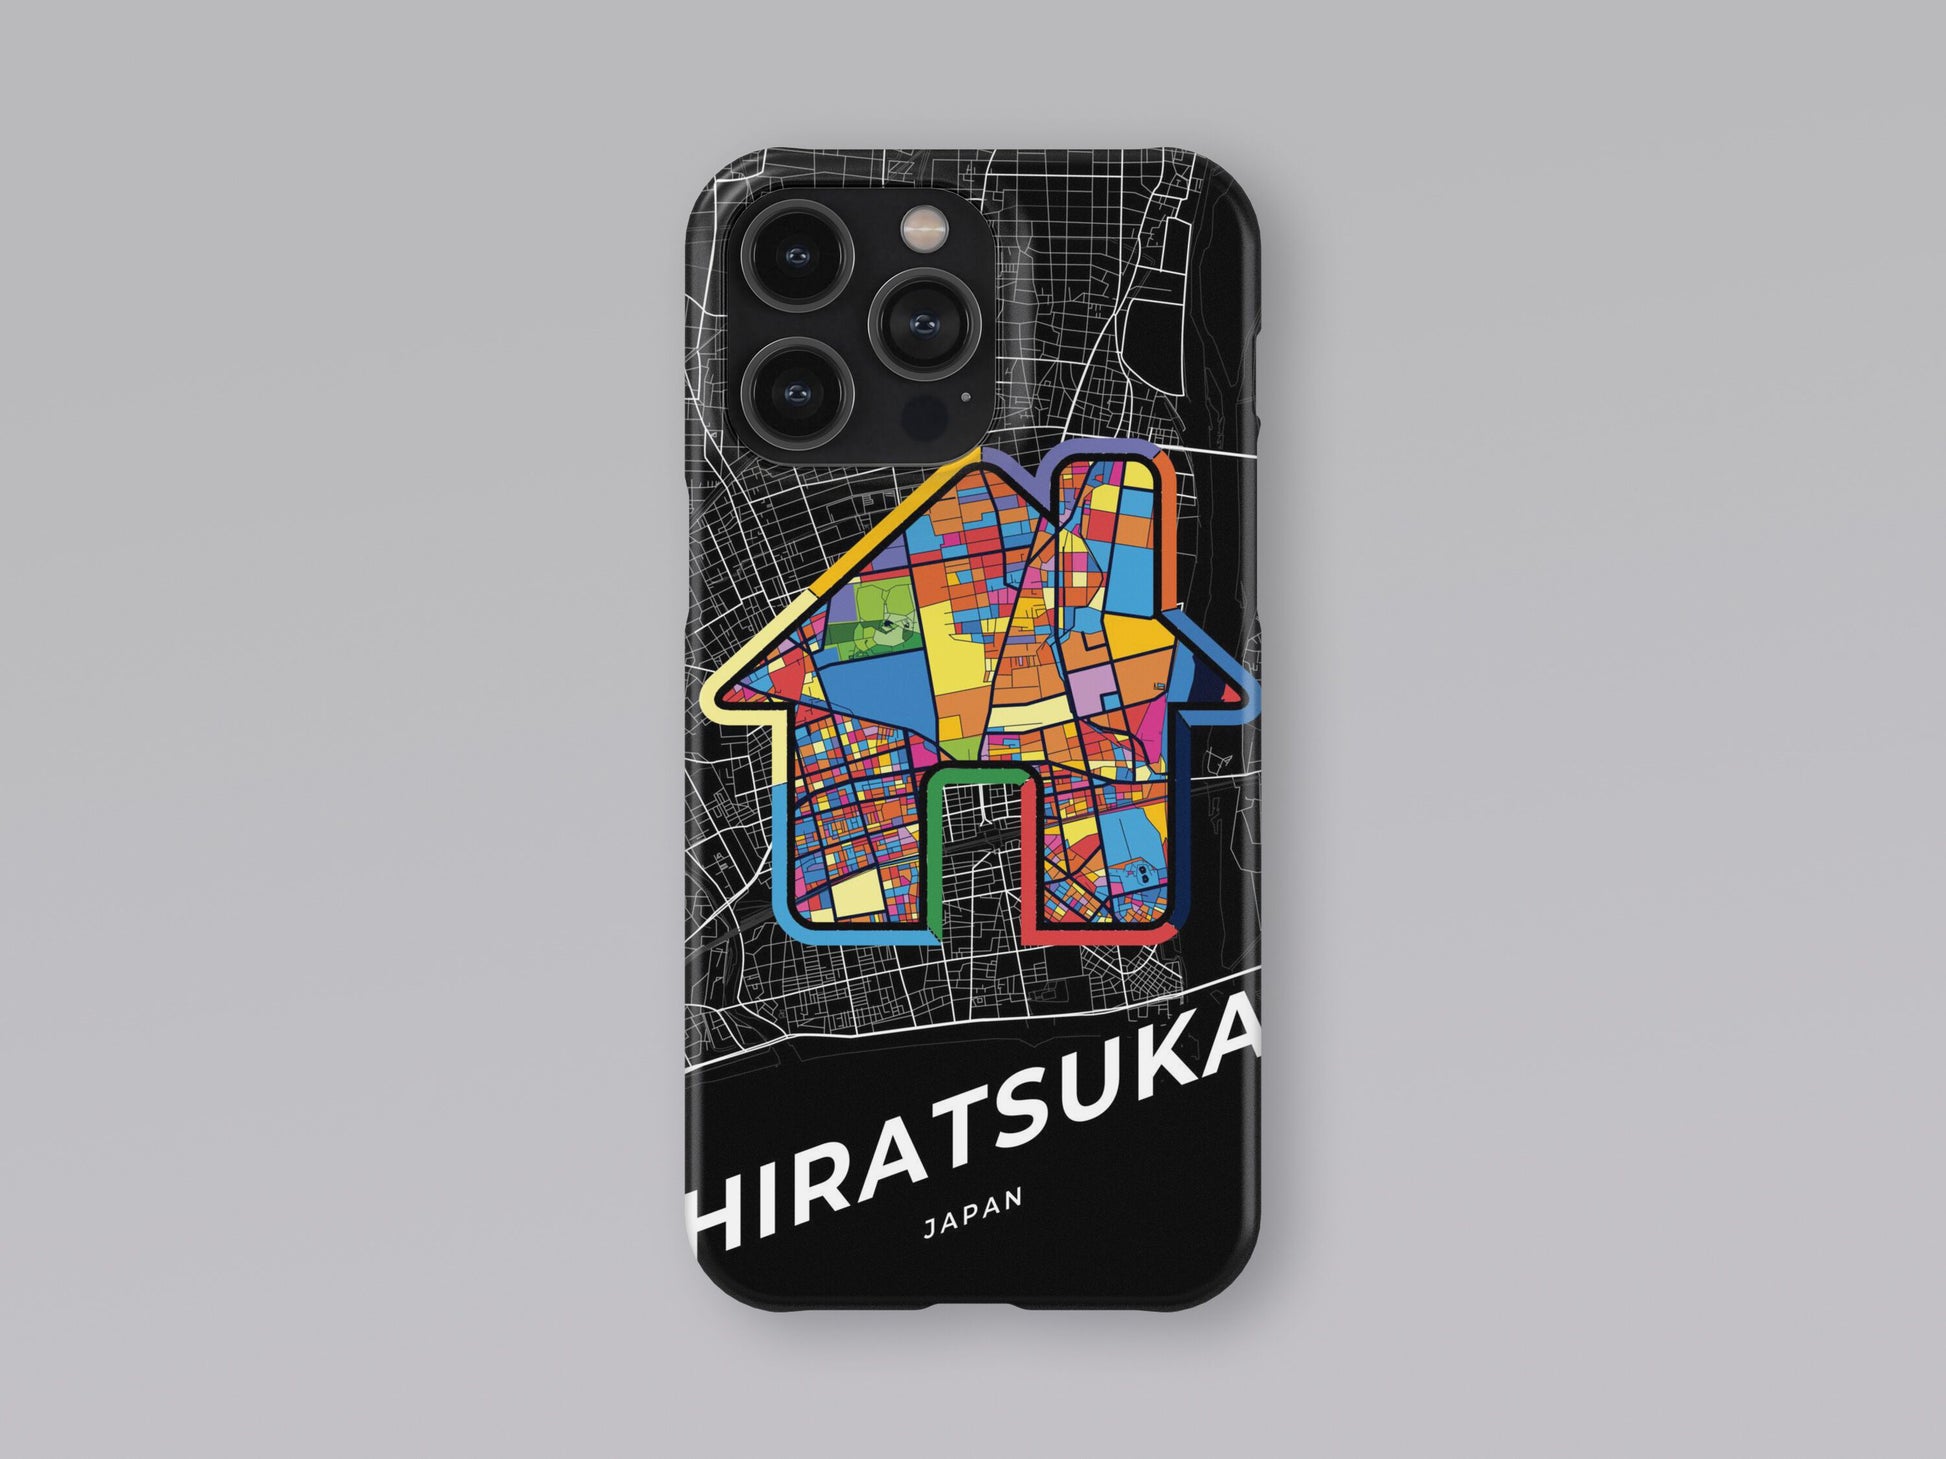 Hiratsuka Japan slim phone case with colorful icon. Birthday, wedding or housewarming gift. Couple match cases. 3